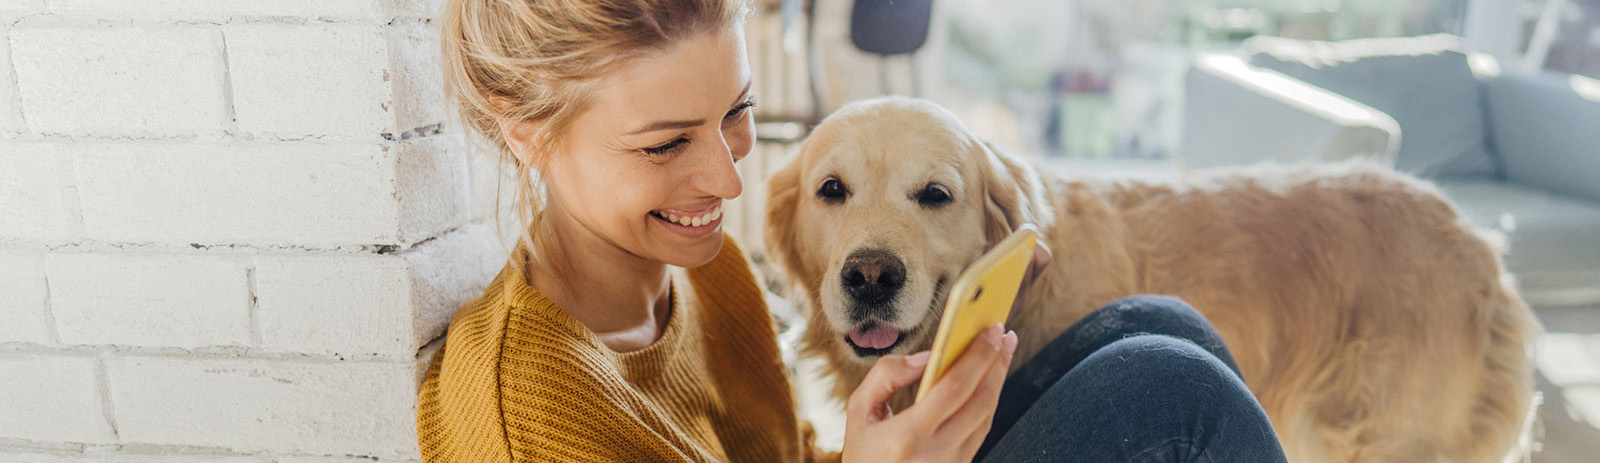 Woman using phone while sitting with her dog in living room